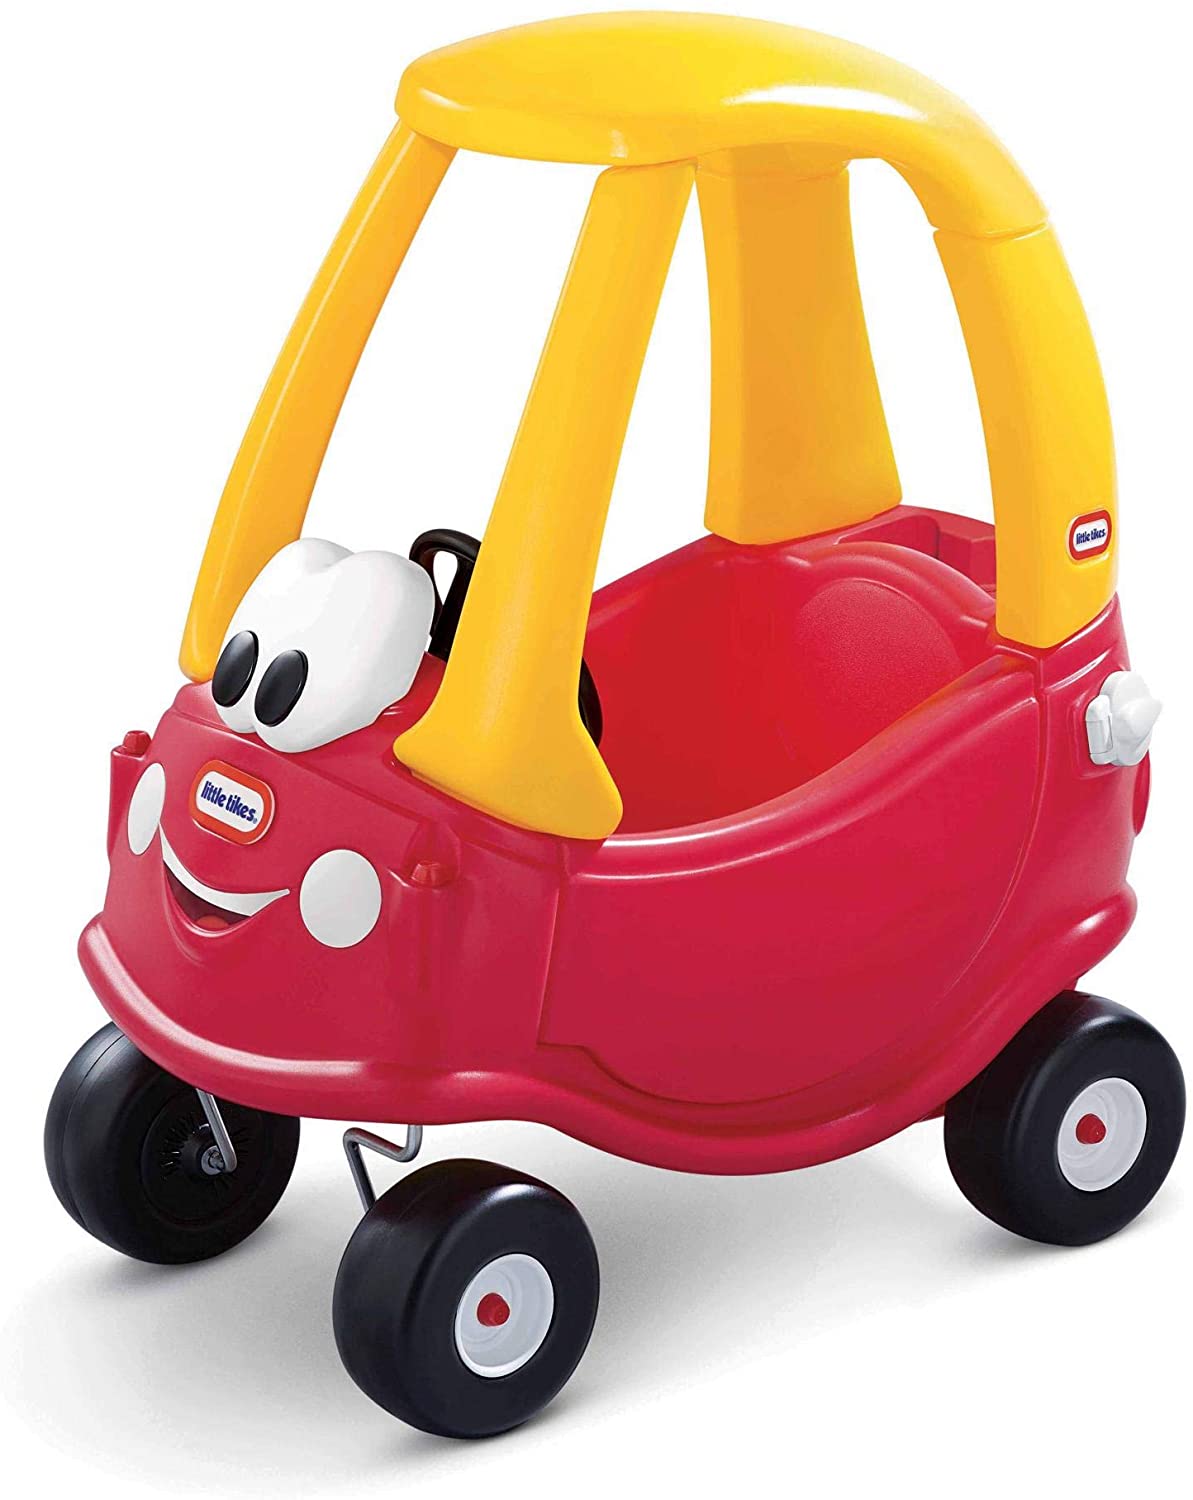 The Best Ride & Push Cars and Trucks — Little Tikes Cozy Coupe Car on simplymodern.com